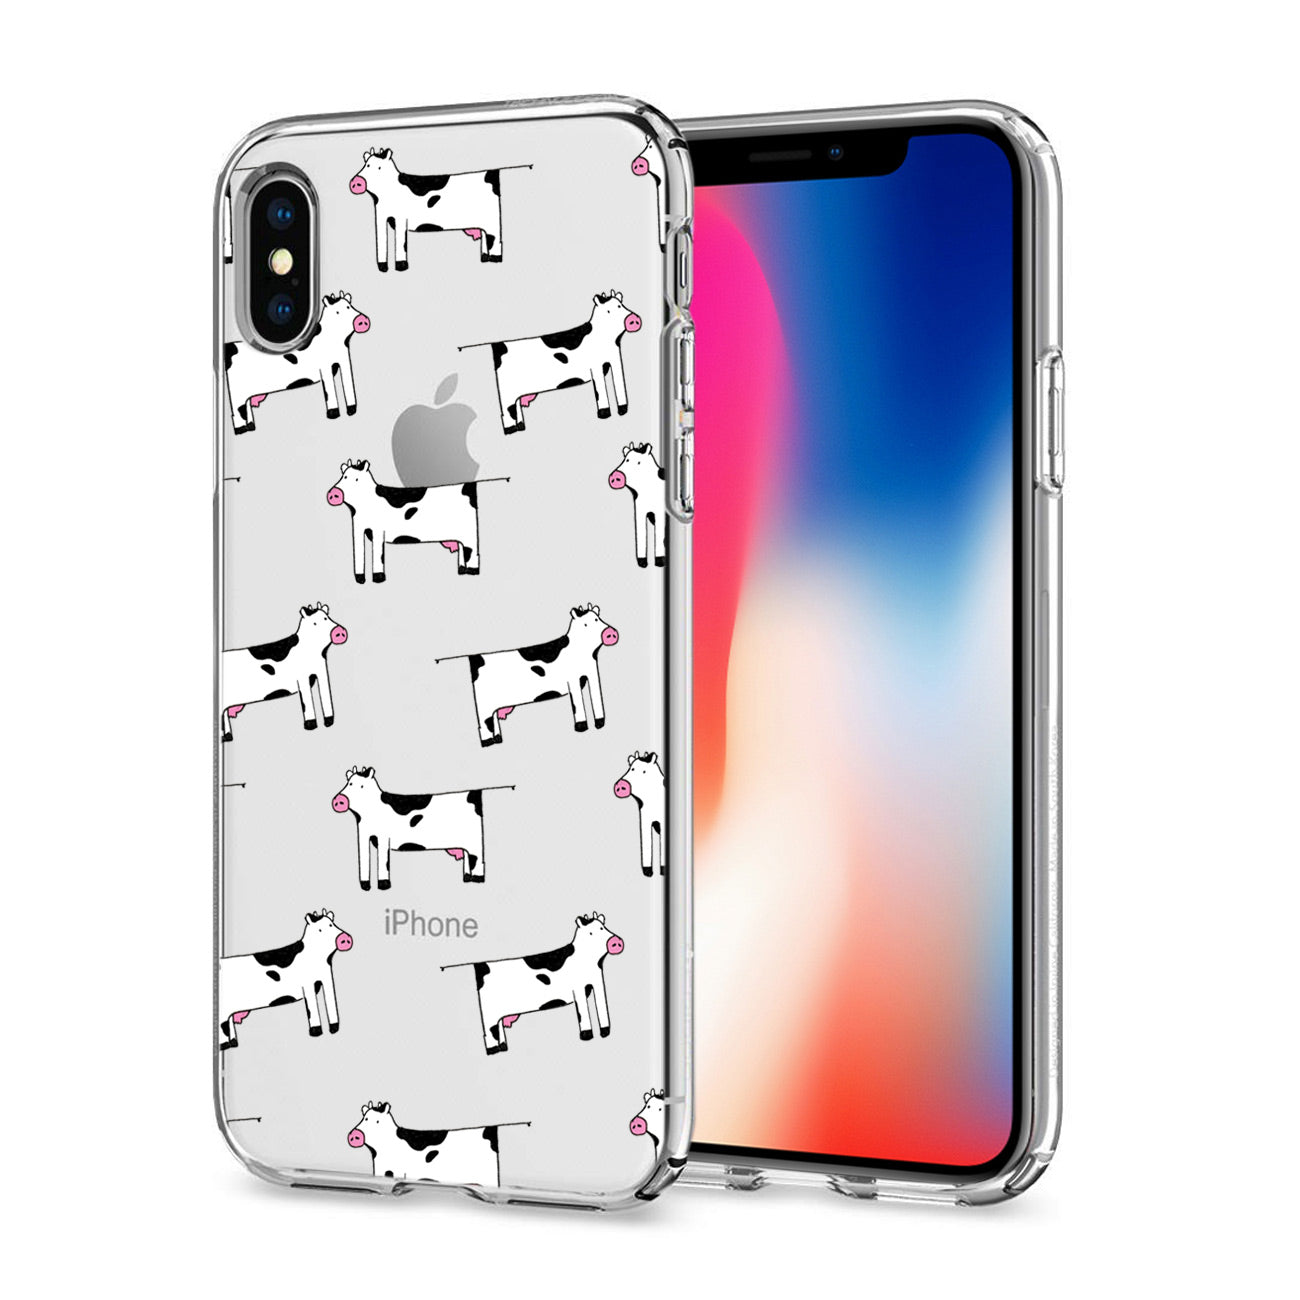 Apple iPhone X/iPhone XS Design Air Cushion Case With Cow Design